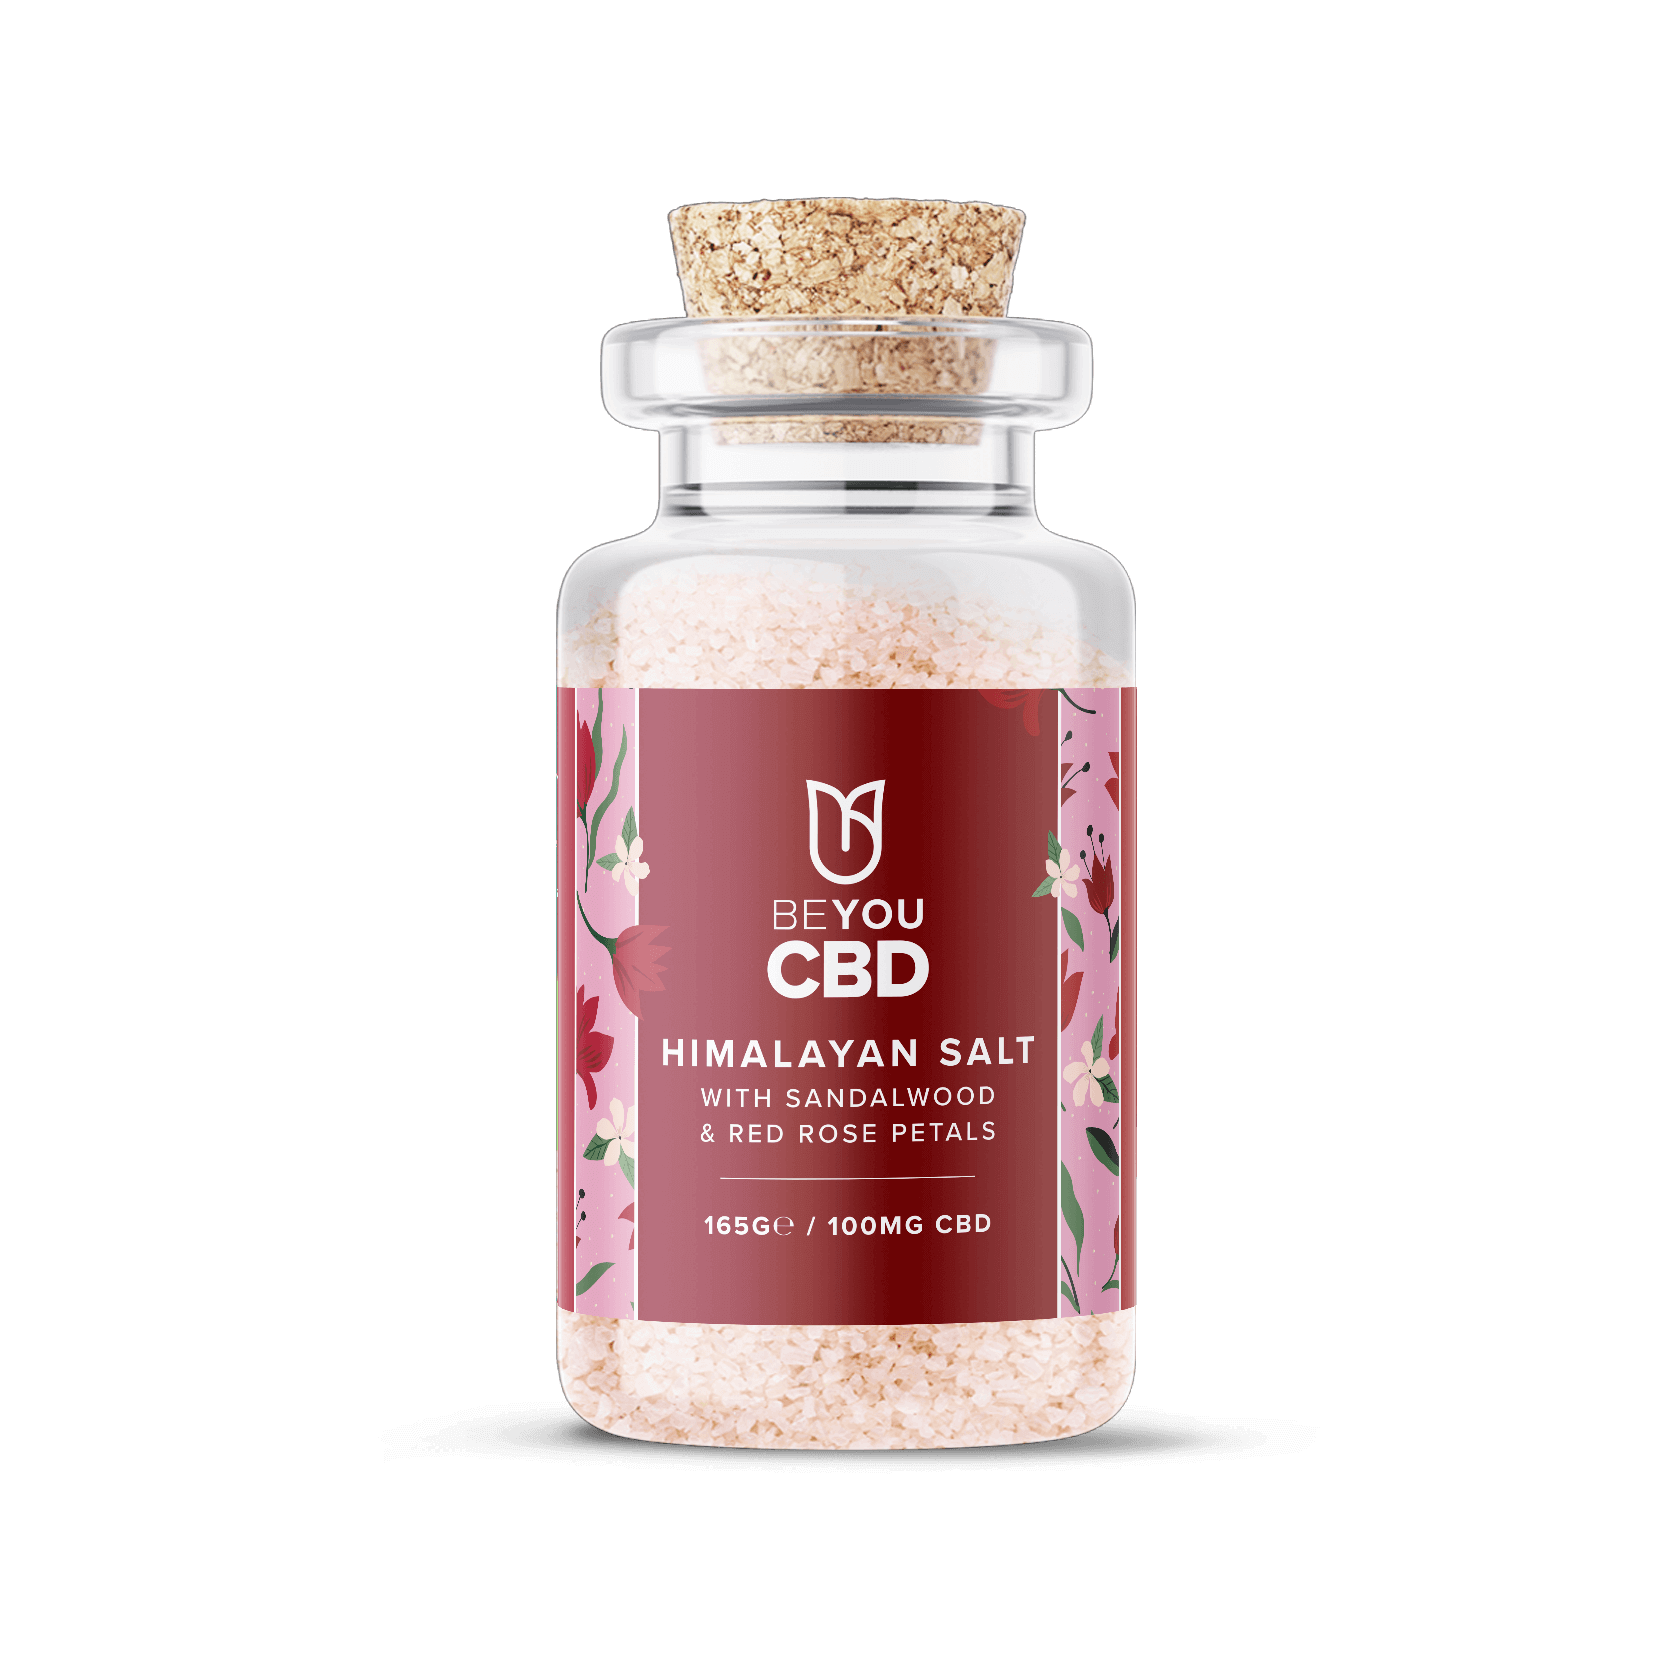 CBD and himalayan bath salts with sandalwood essential oil and red rose petals for a bath which is 100% natural